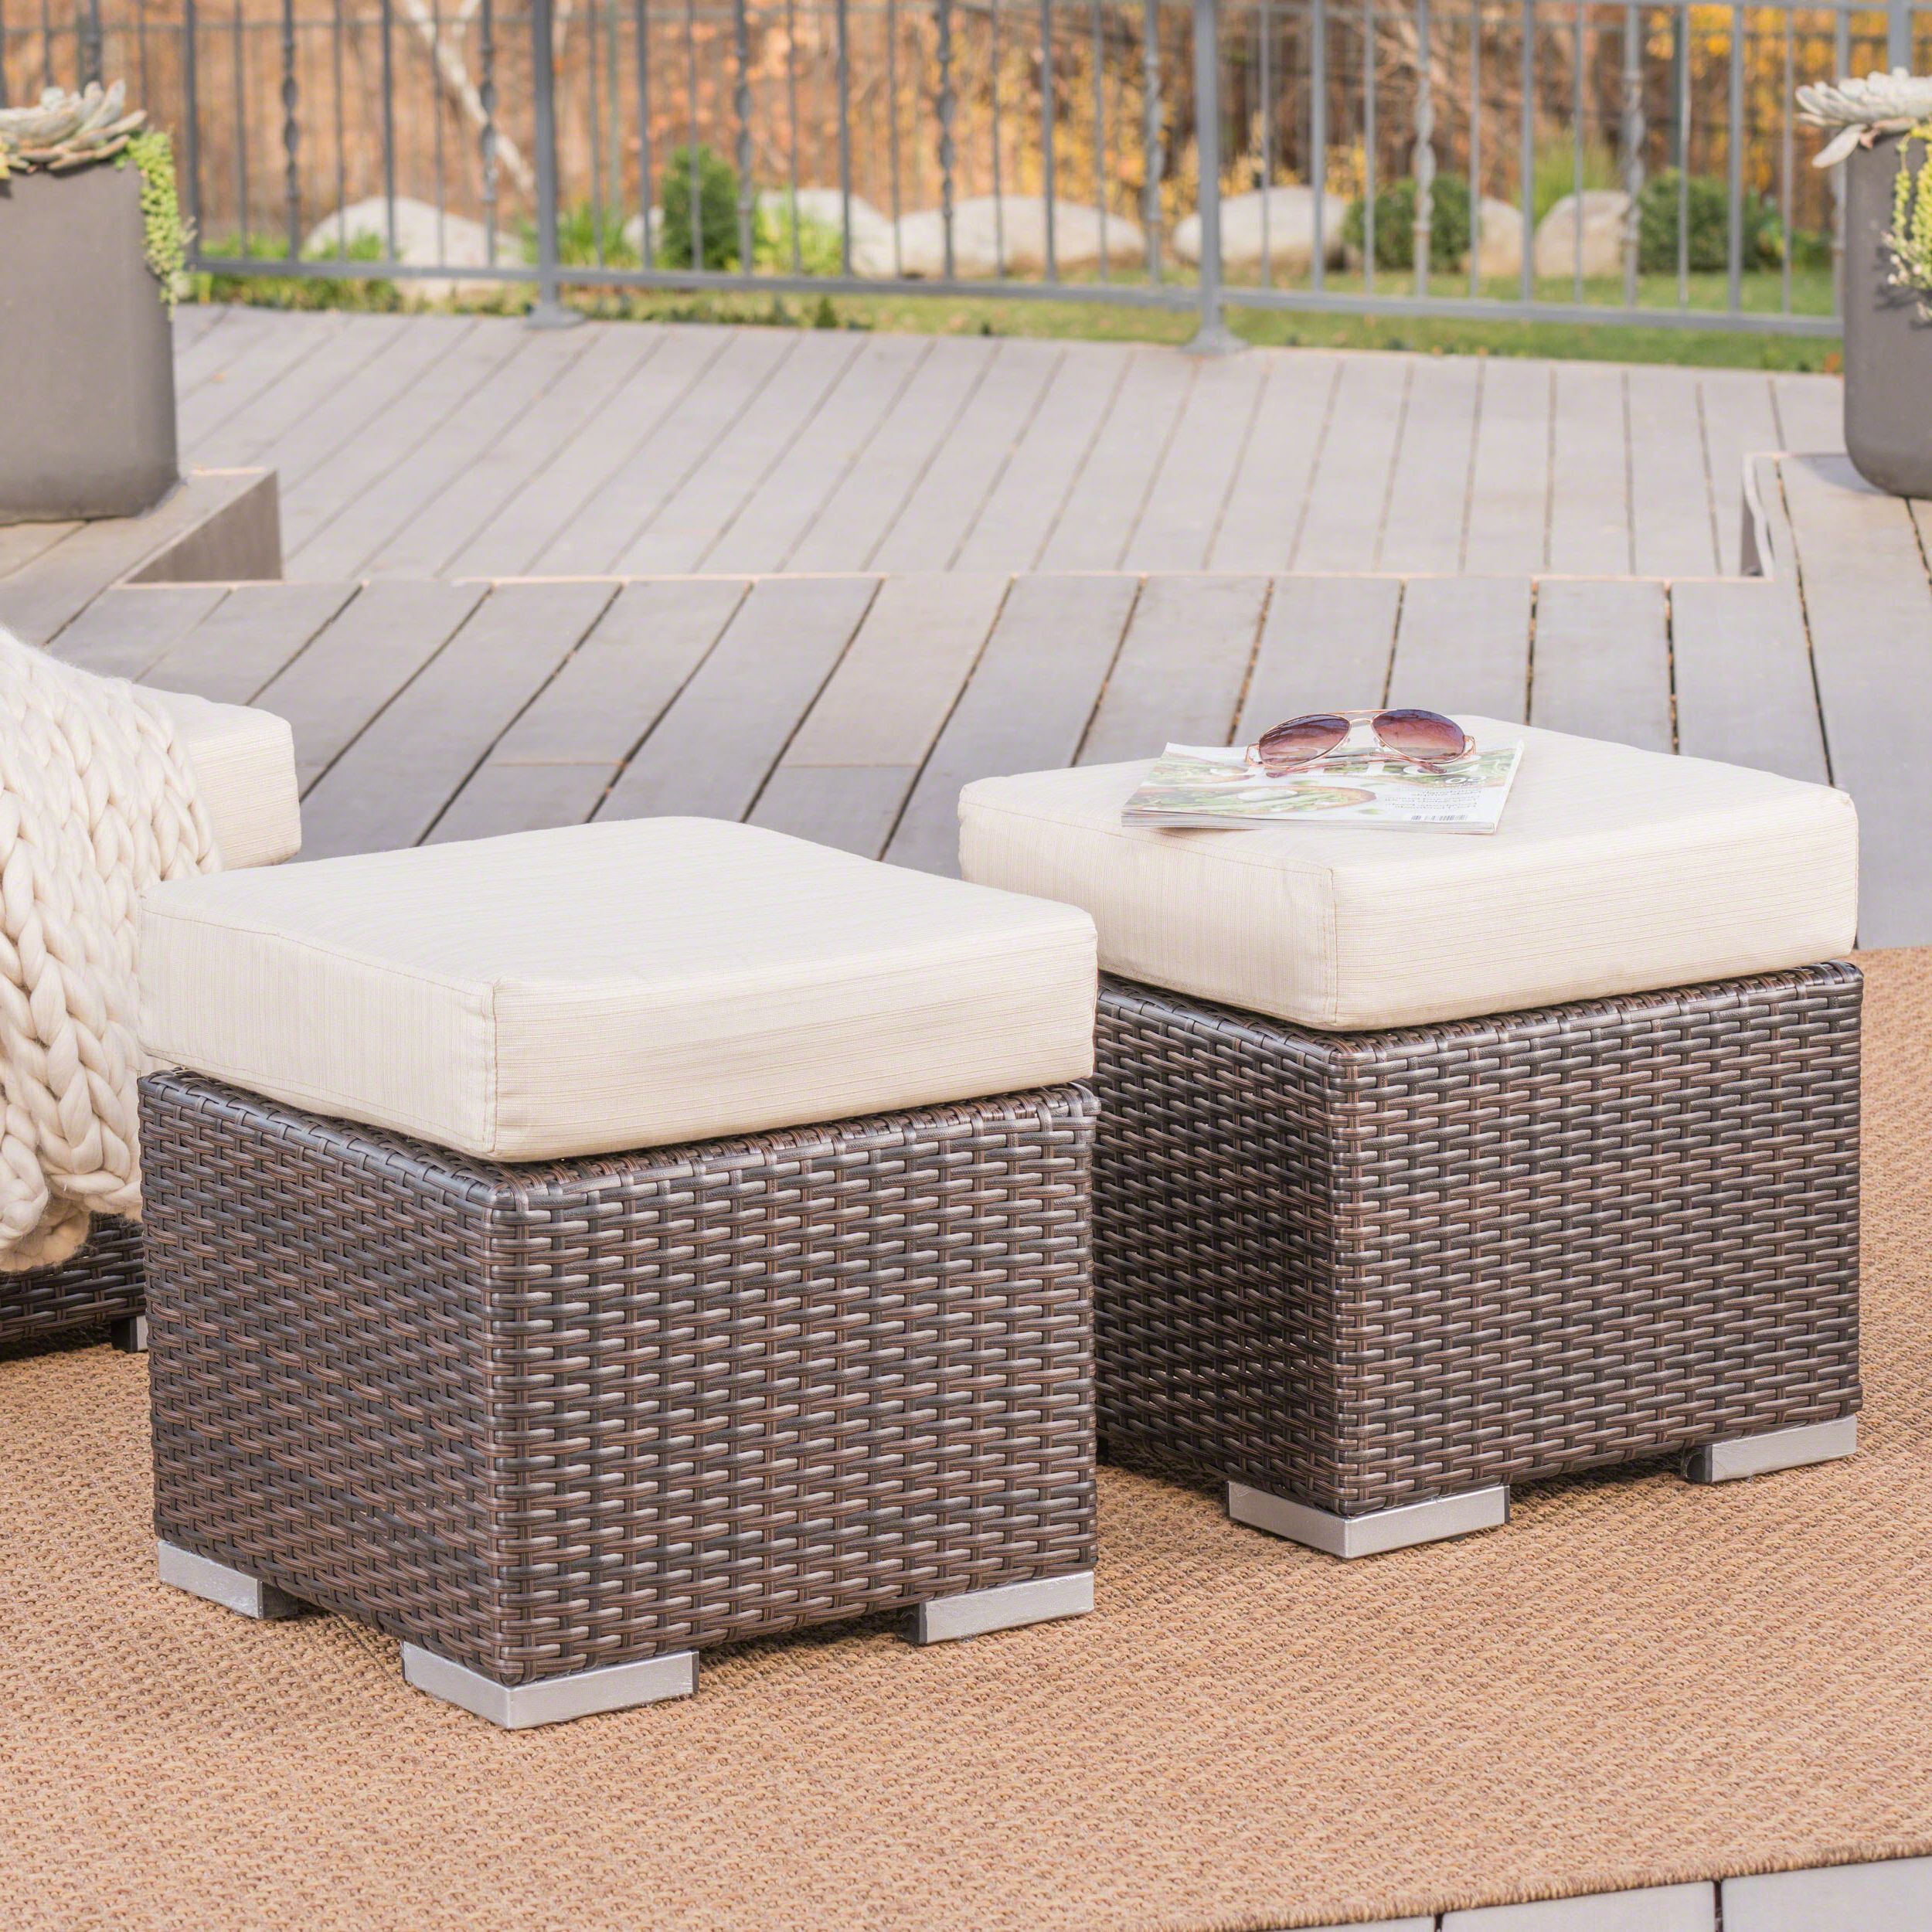 16 Inch Ottomans Pertaining To Well Known Avianna Outdoor 16 Inch Wicker Ottoman Seat With Cushion, Set Of 2,  Multibrown, Beige – Walmart (View 13 of 15)